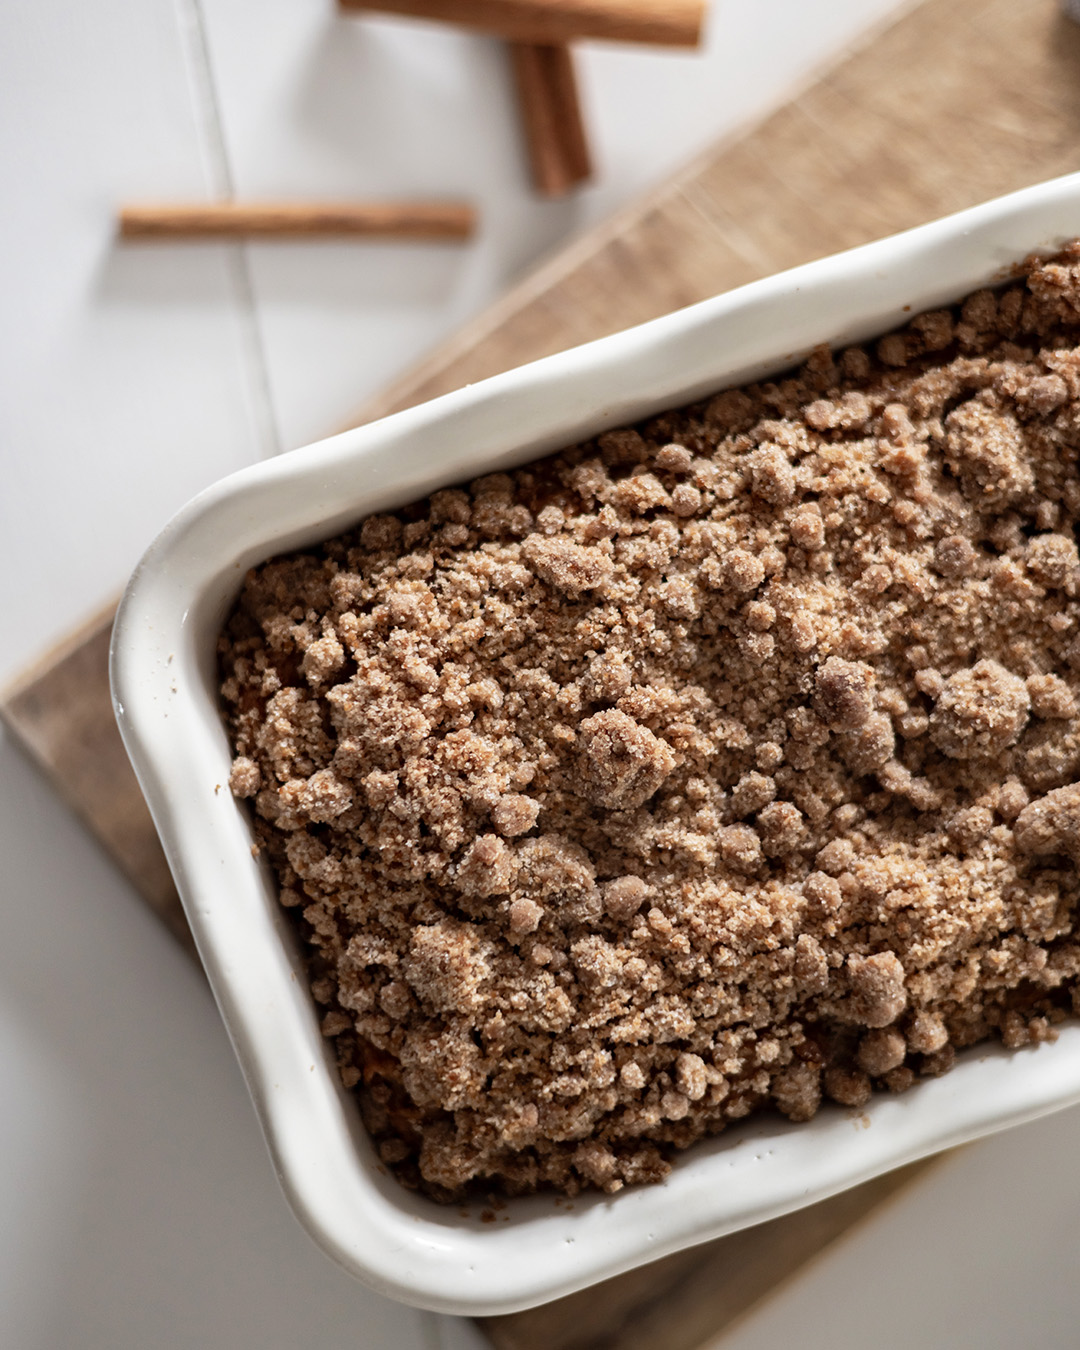 Detail photo of apple bread with streusel topping in a white ceramic baking dish.